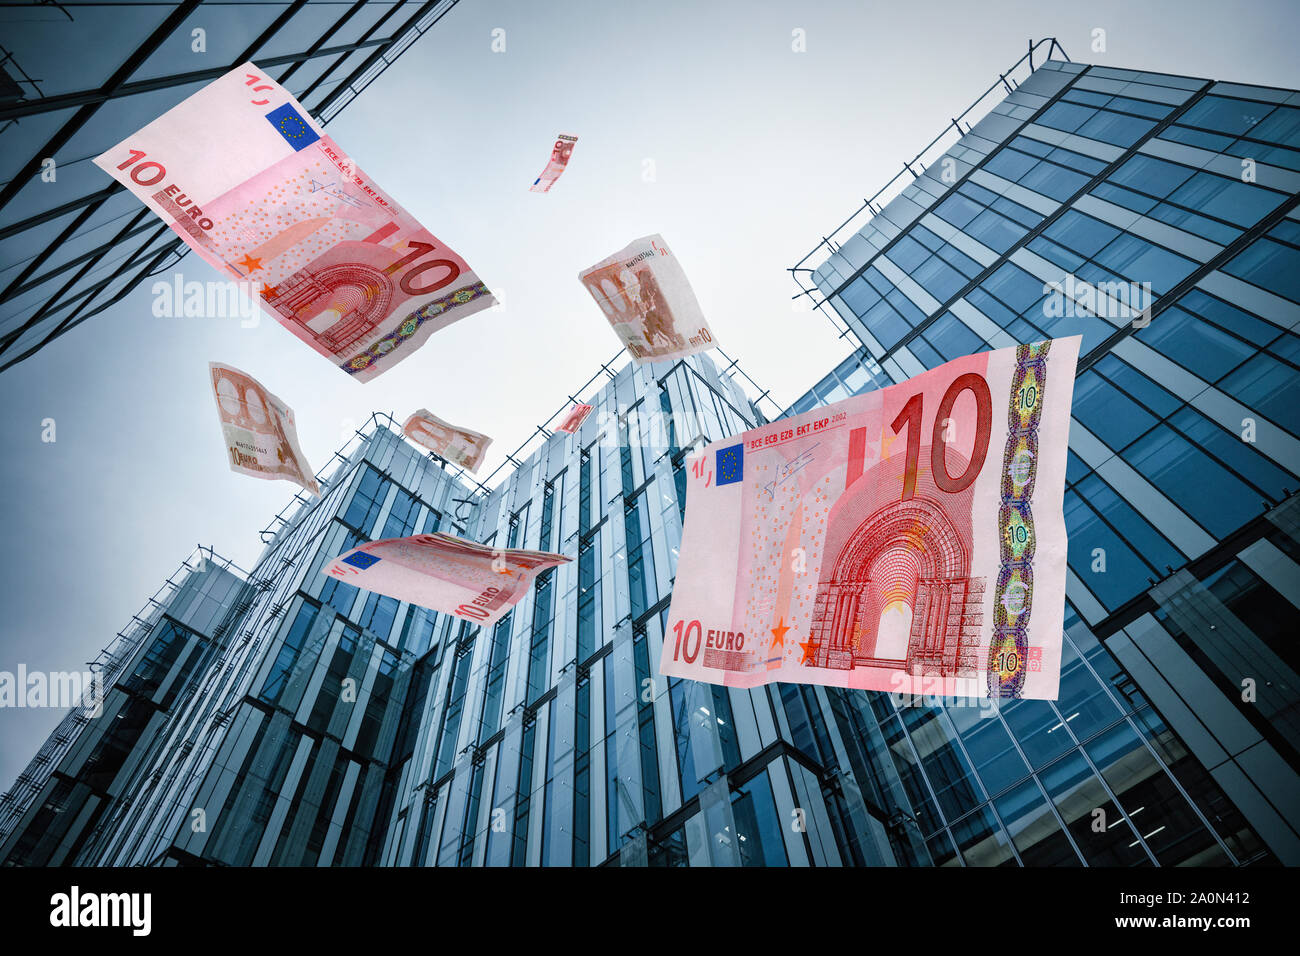 Euros falling from corporate city office buildings skyscrapers Stock Photo